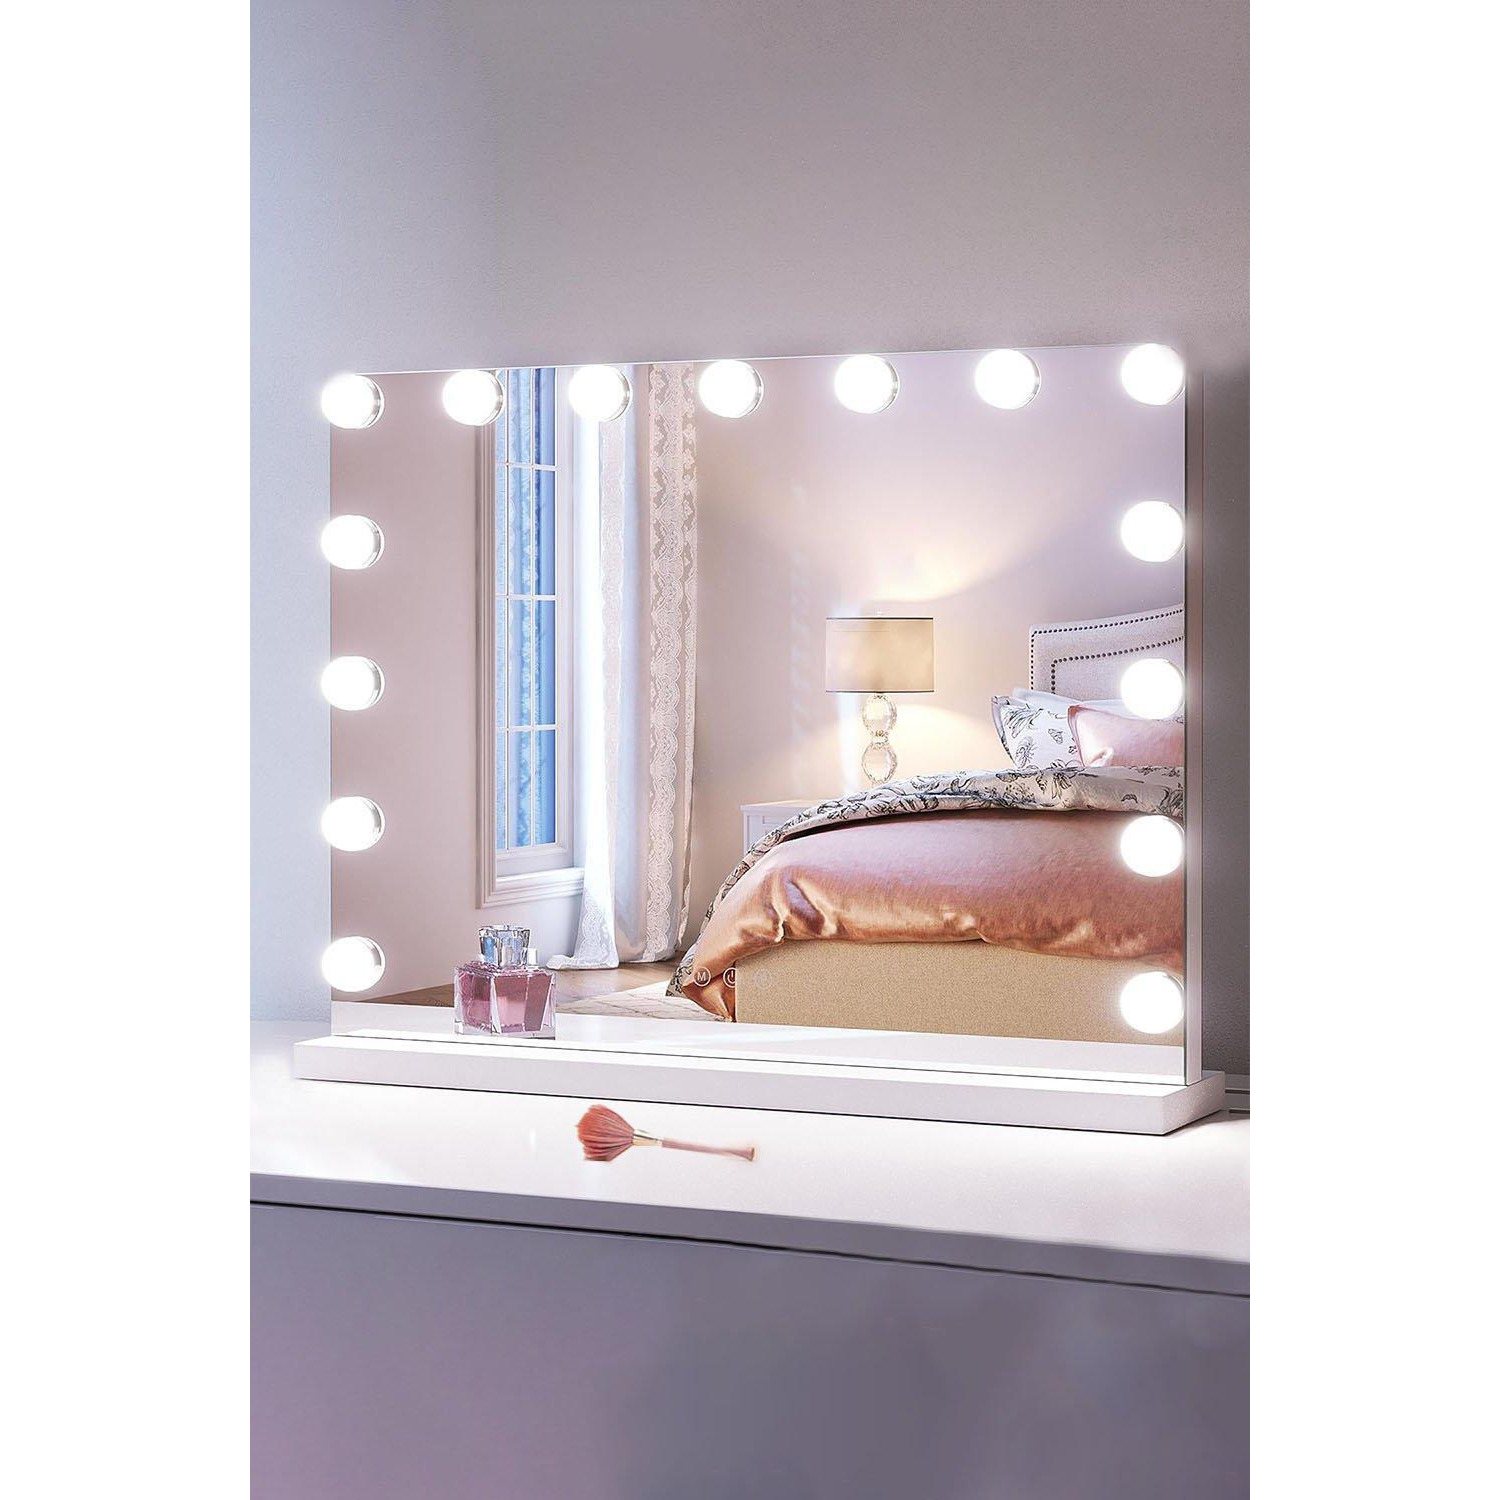 Touch Control Hollywood Makeup  Beauty Mirror With 3 Color Light - image 1